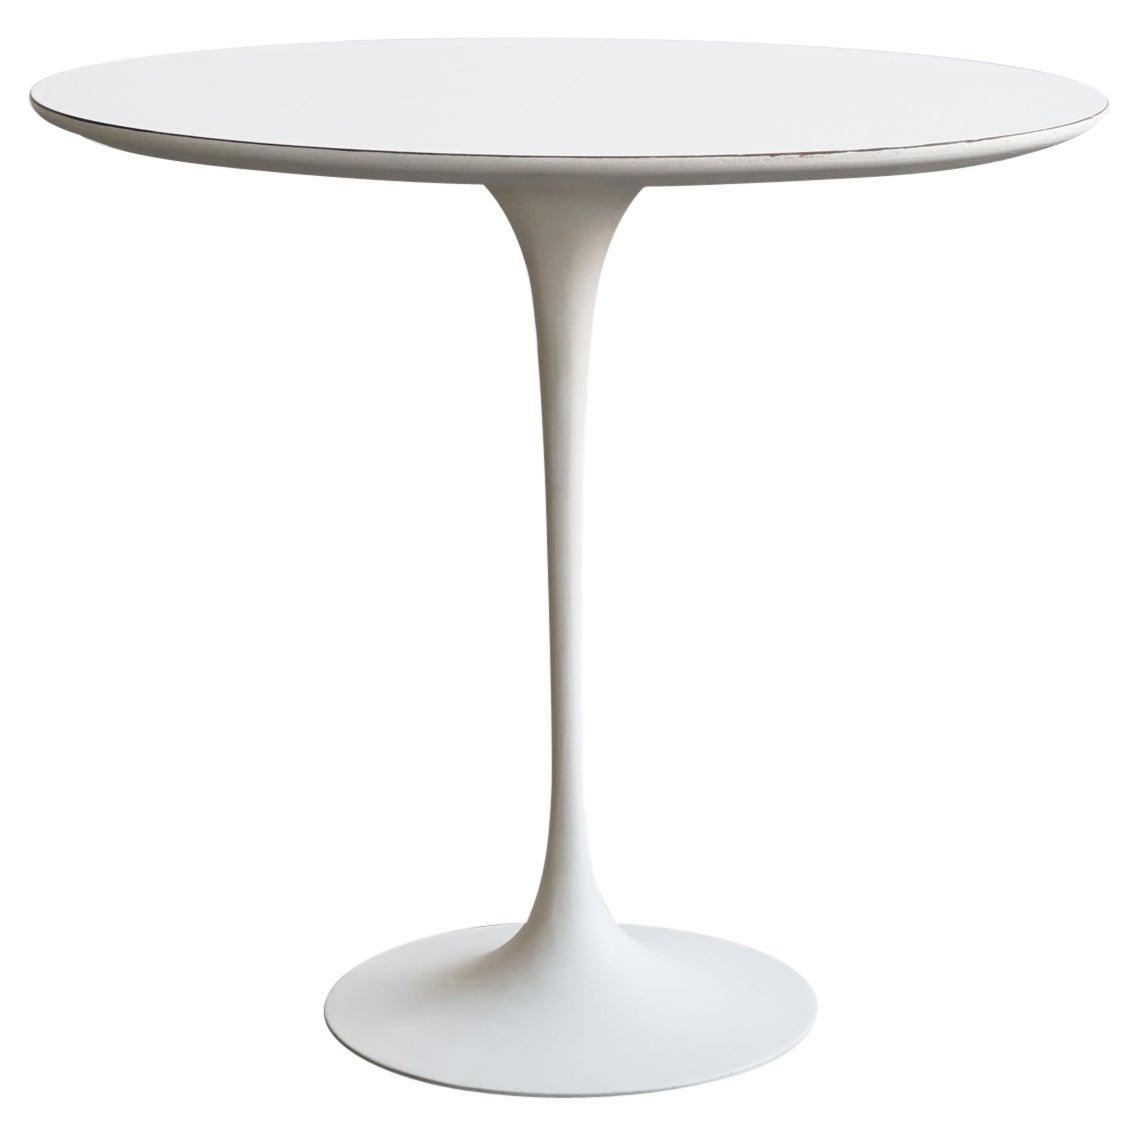 Very early Eero Saarinen for Knoll Tulip table, oval shaped top circa 1957 For Sale